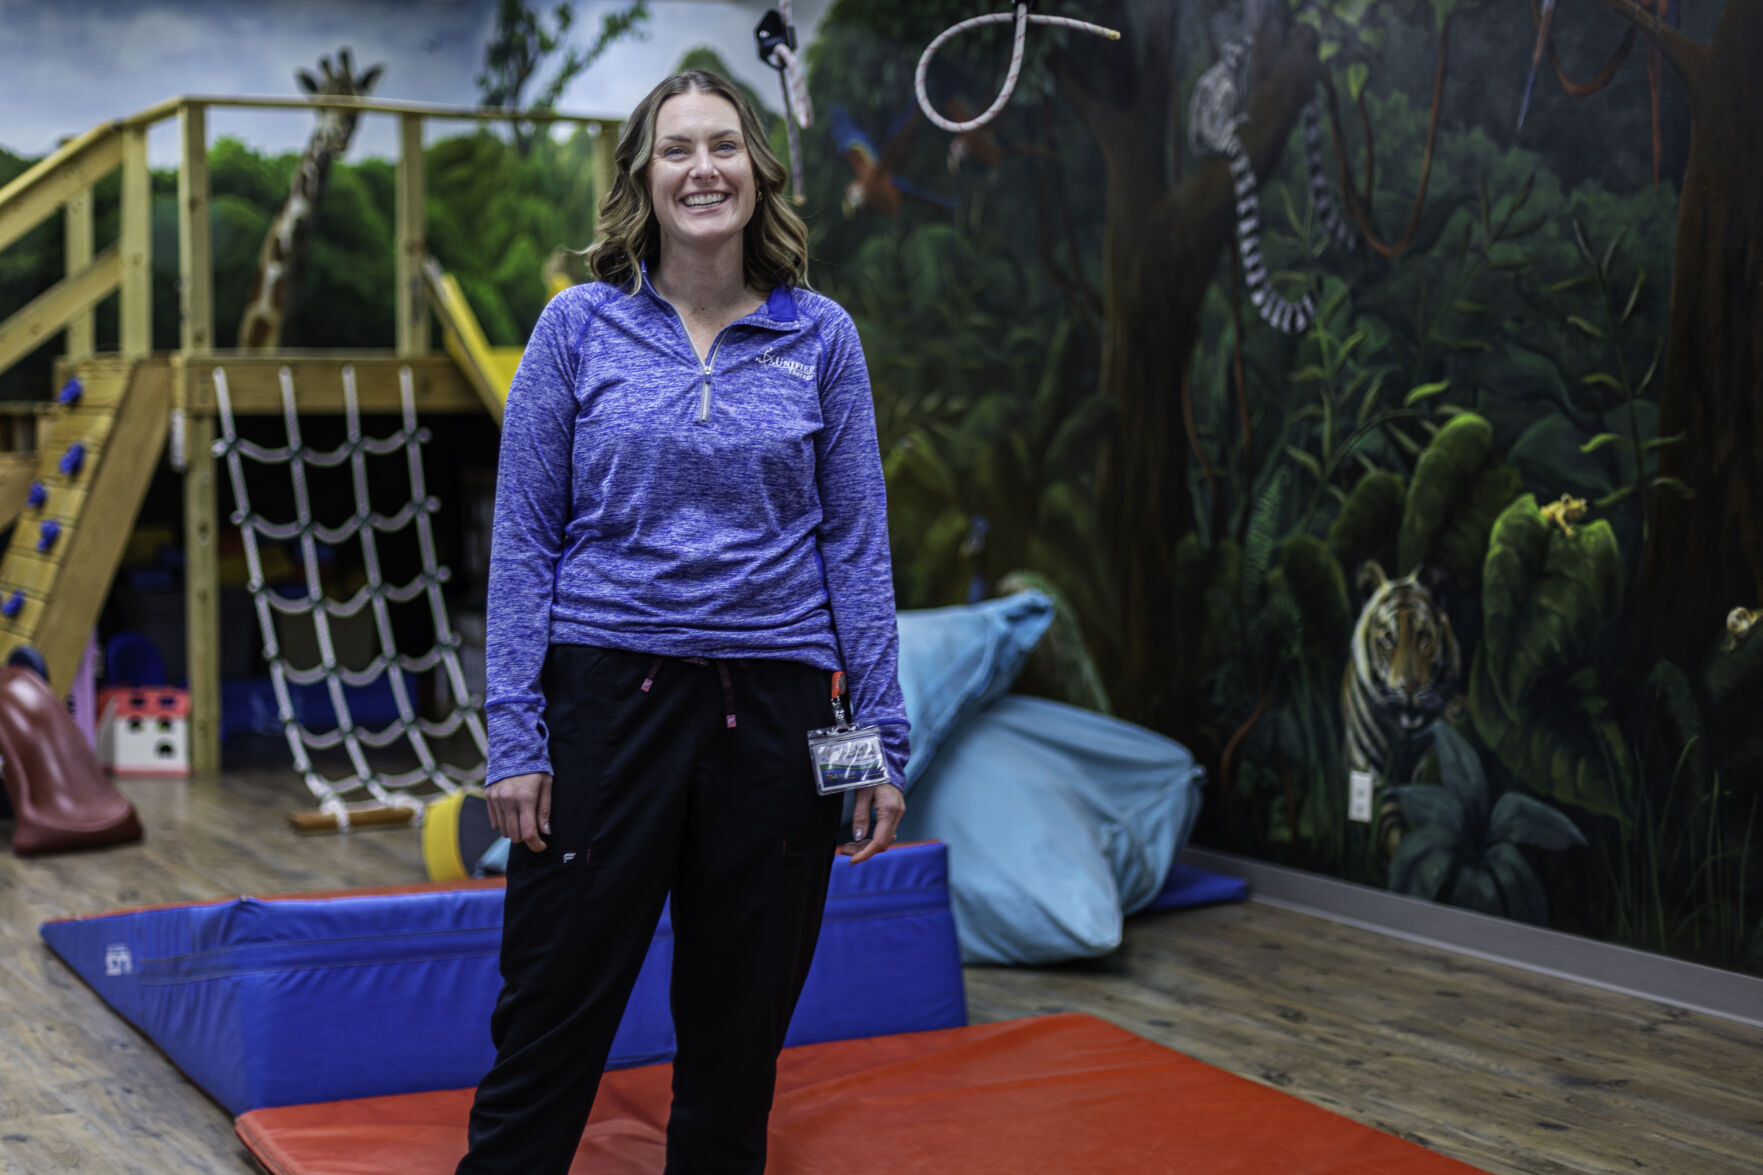 Kelly Loeffelholz, with Unified Therapy Services.    PHOTO CREDIT: Thomas Eckermann
Telegraph Herald